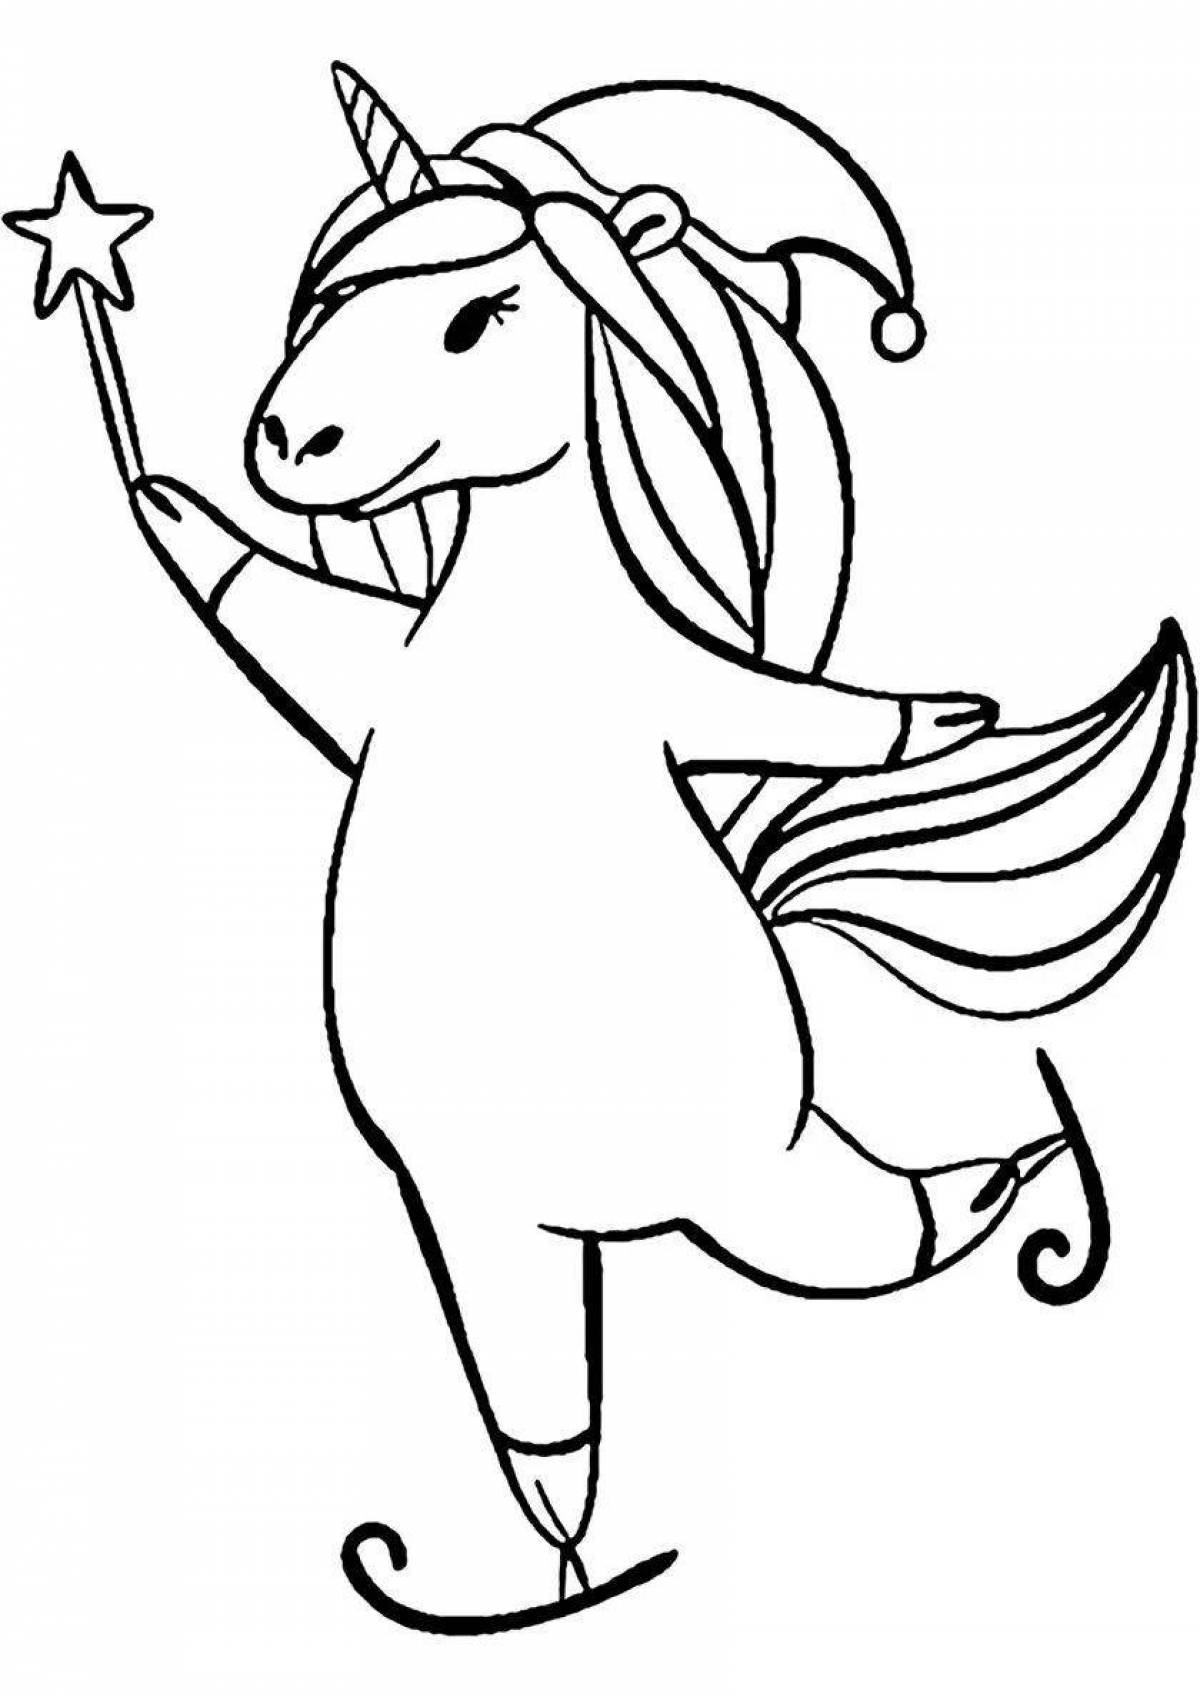 Coloring book cheerful New Year's unicorn